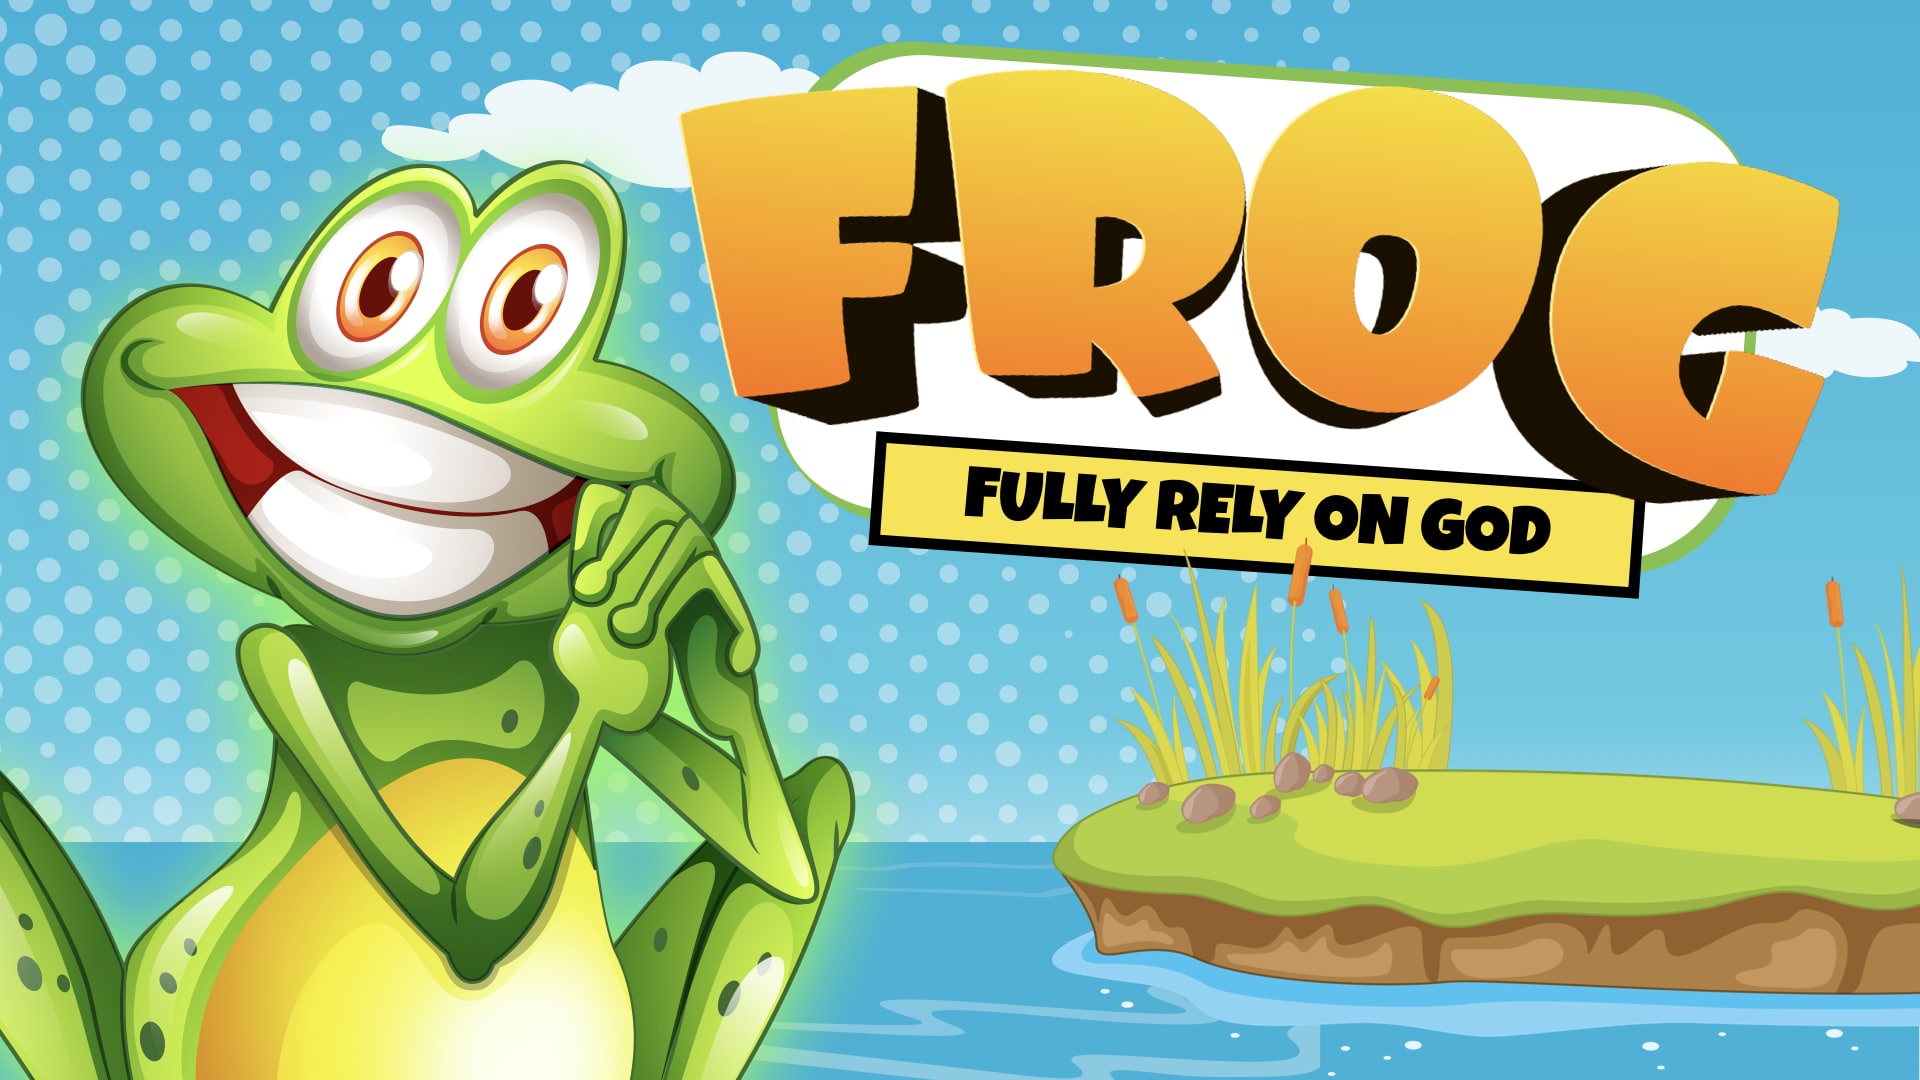 https://iteachchurch.com/wp-content/uploads/2023/02/1.-Frog-Fully-Rely-on-God.001.jpeg